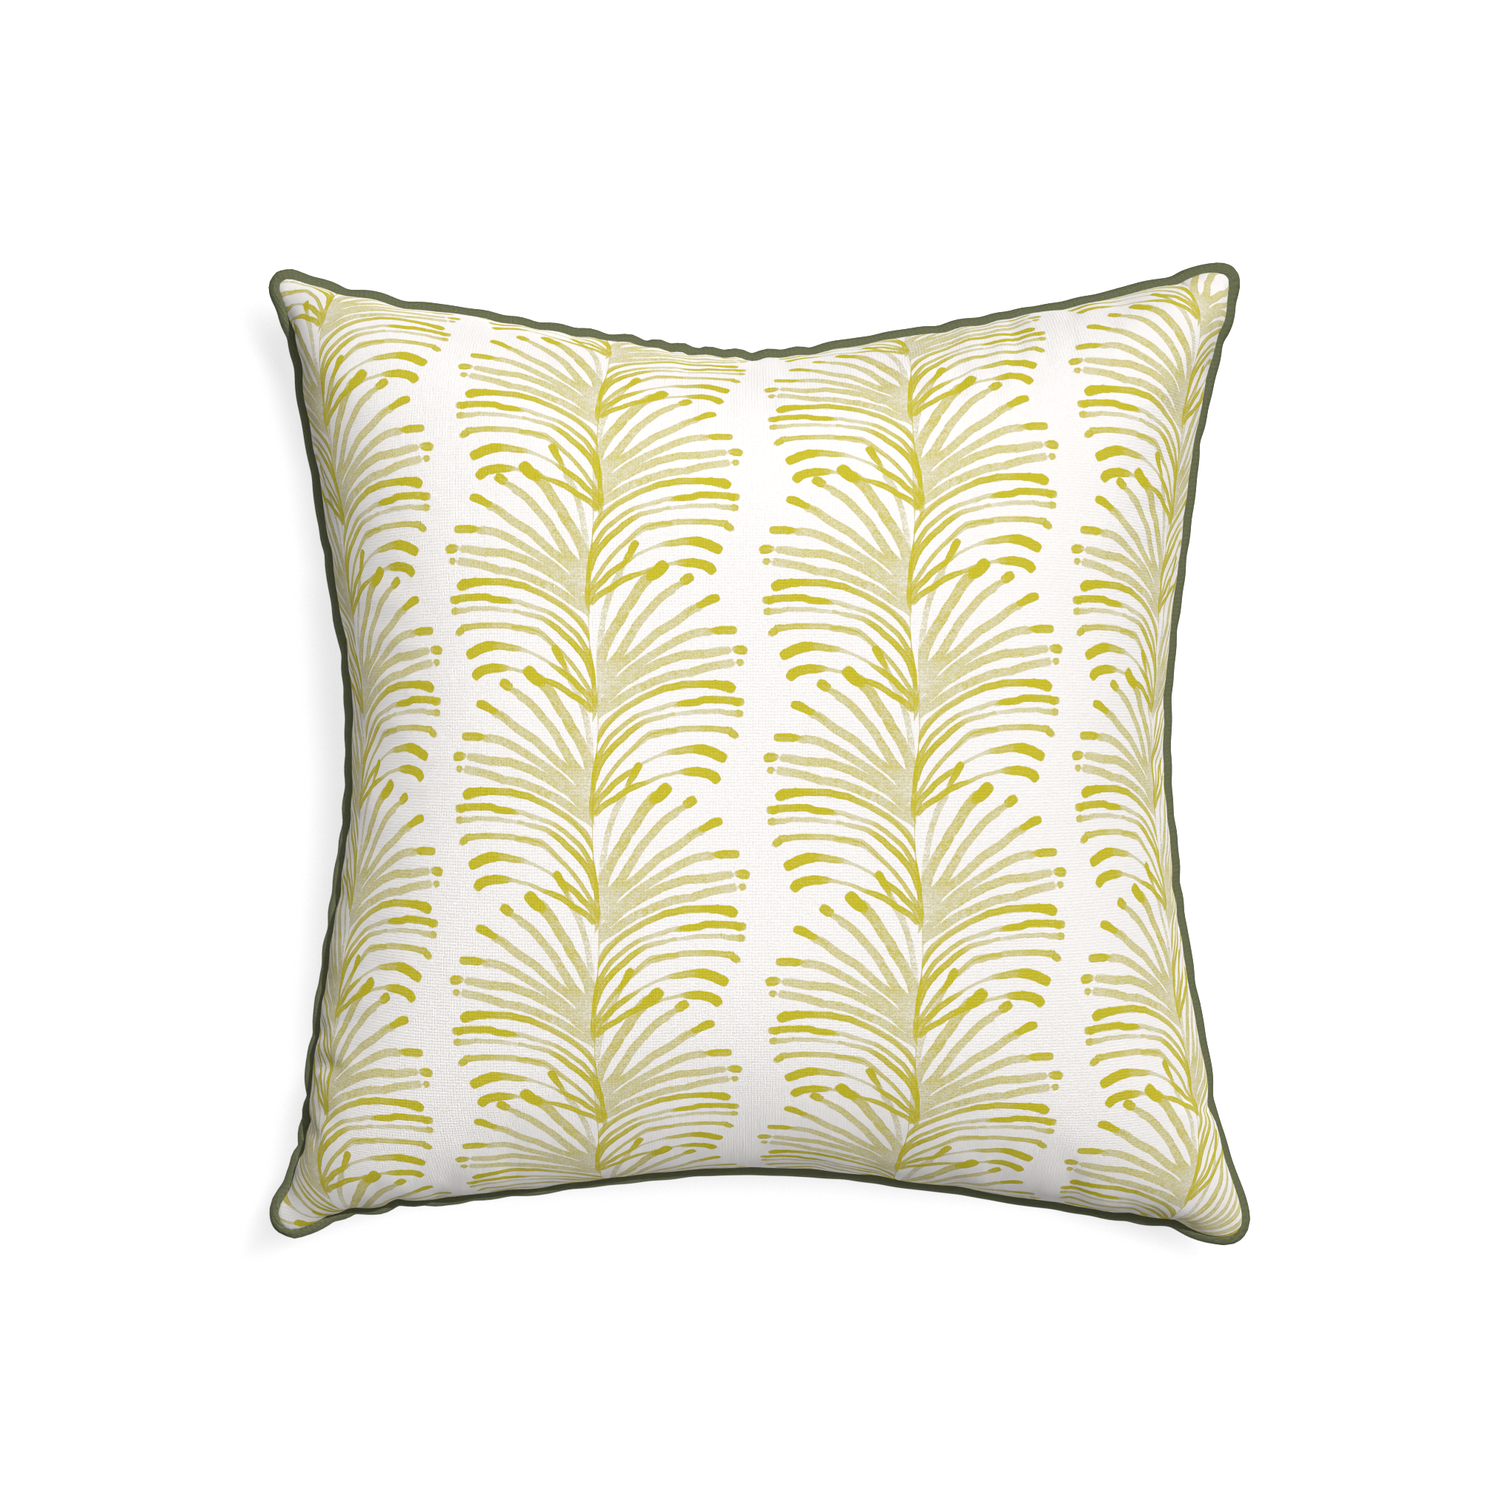 22-square emma chartreuse custom pillow with f piping on white background